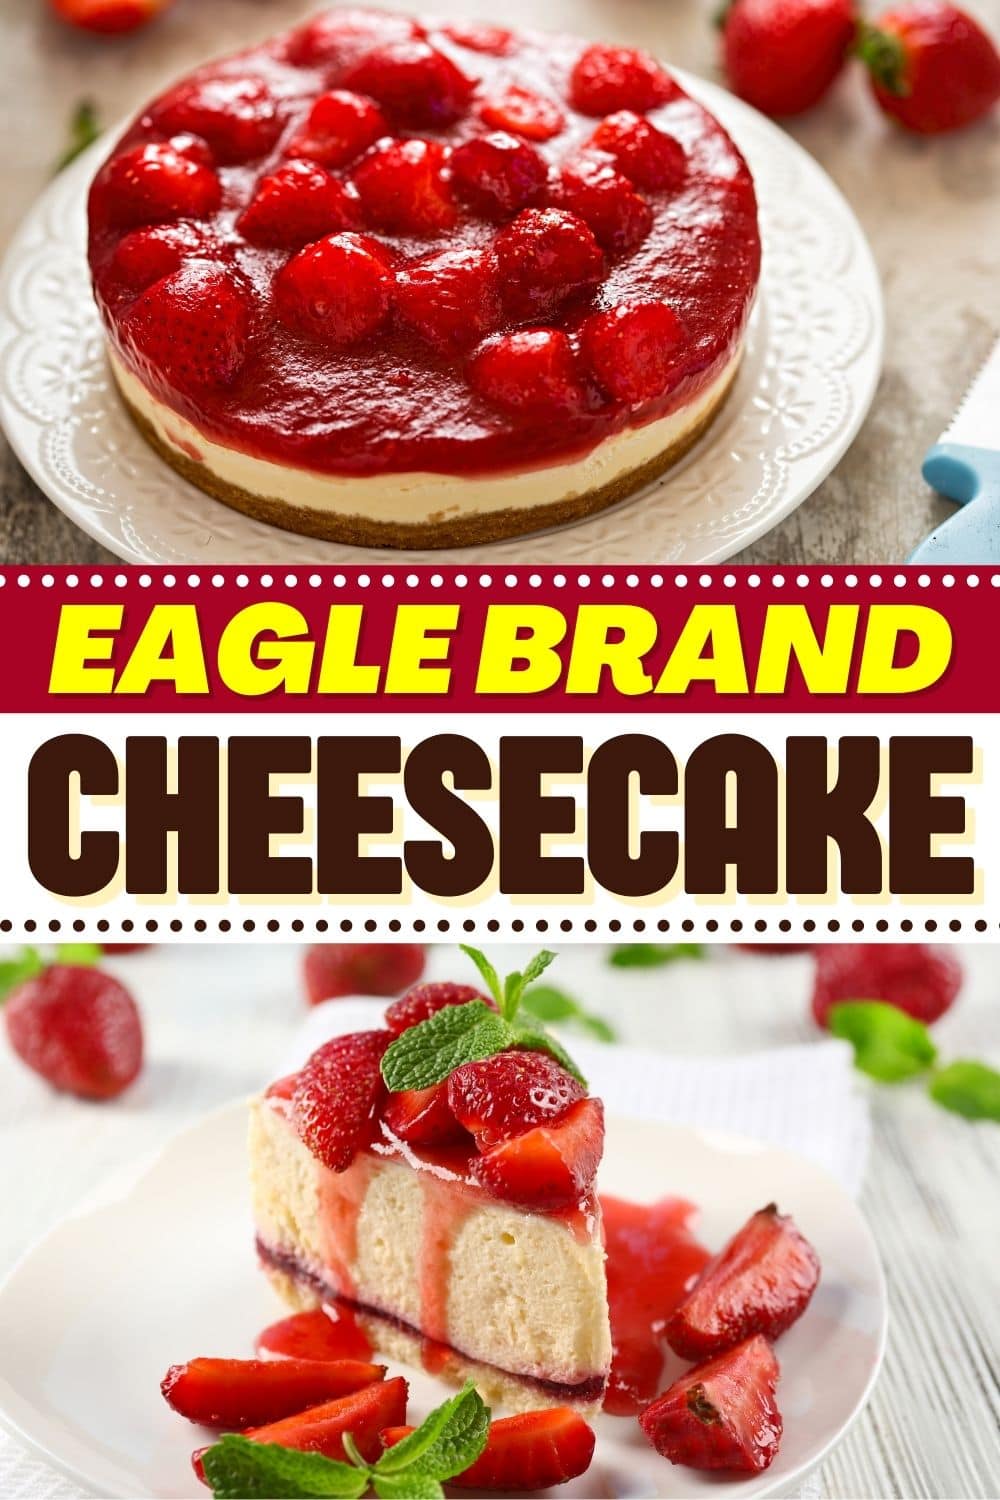 Eagle Brand Cheesecake - Insanely Good